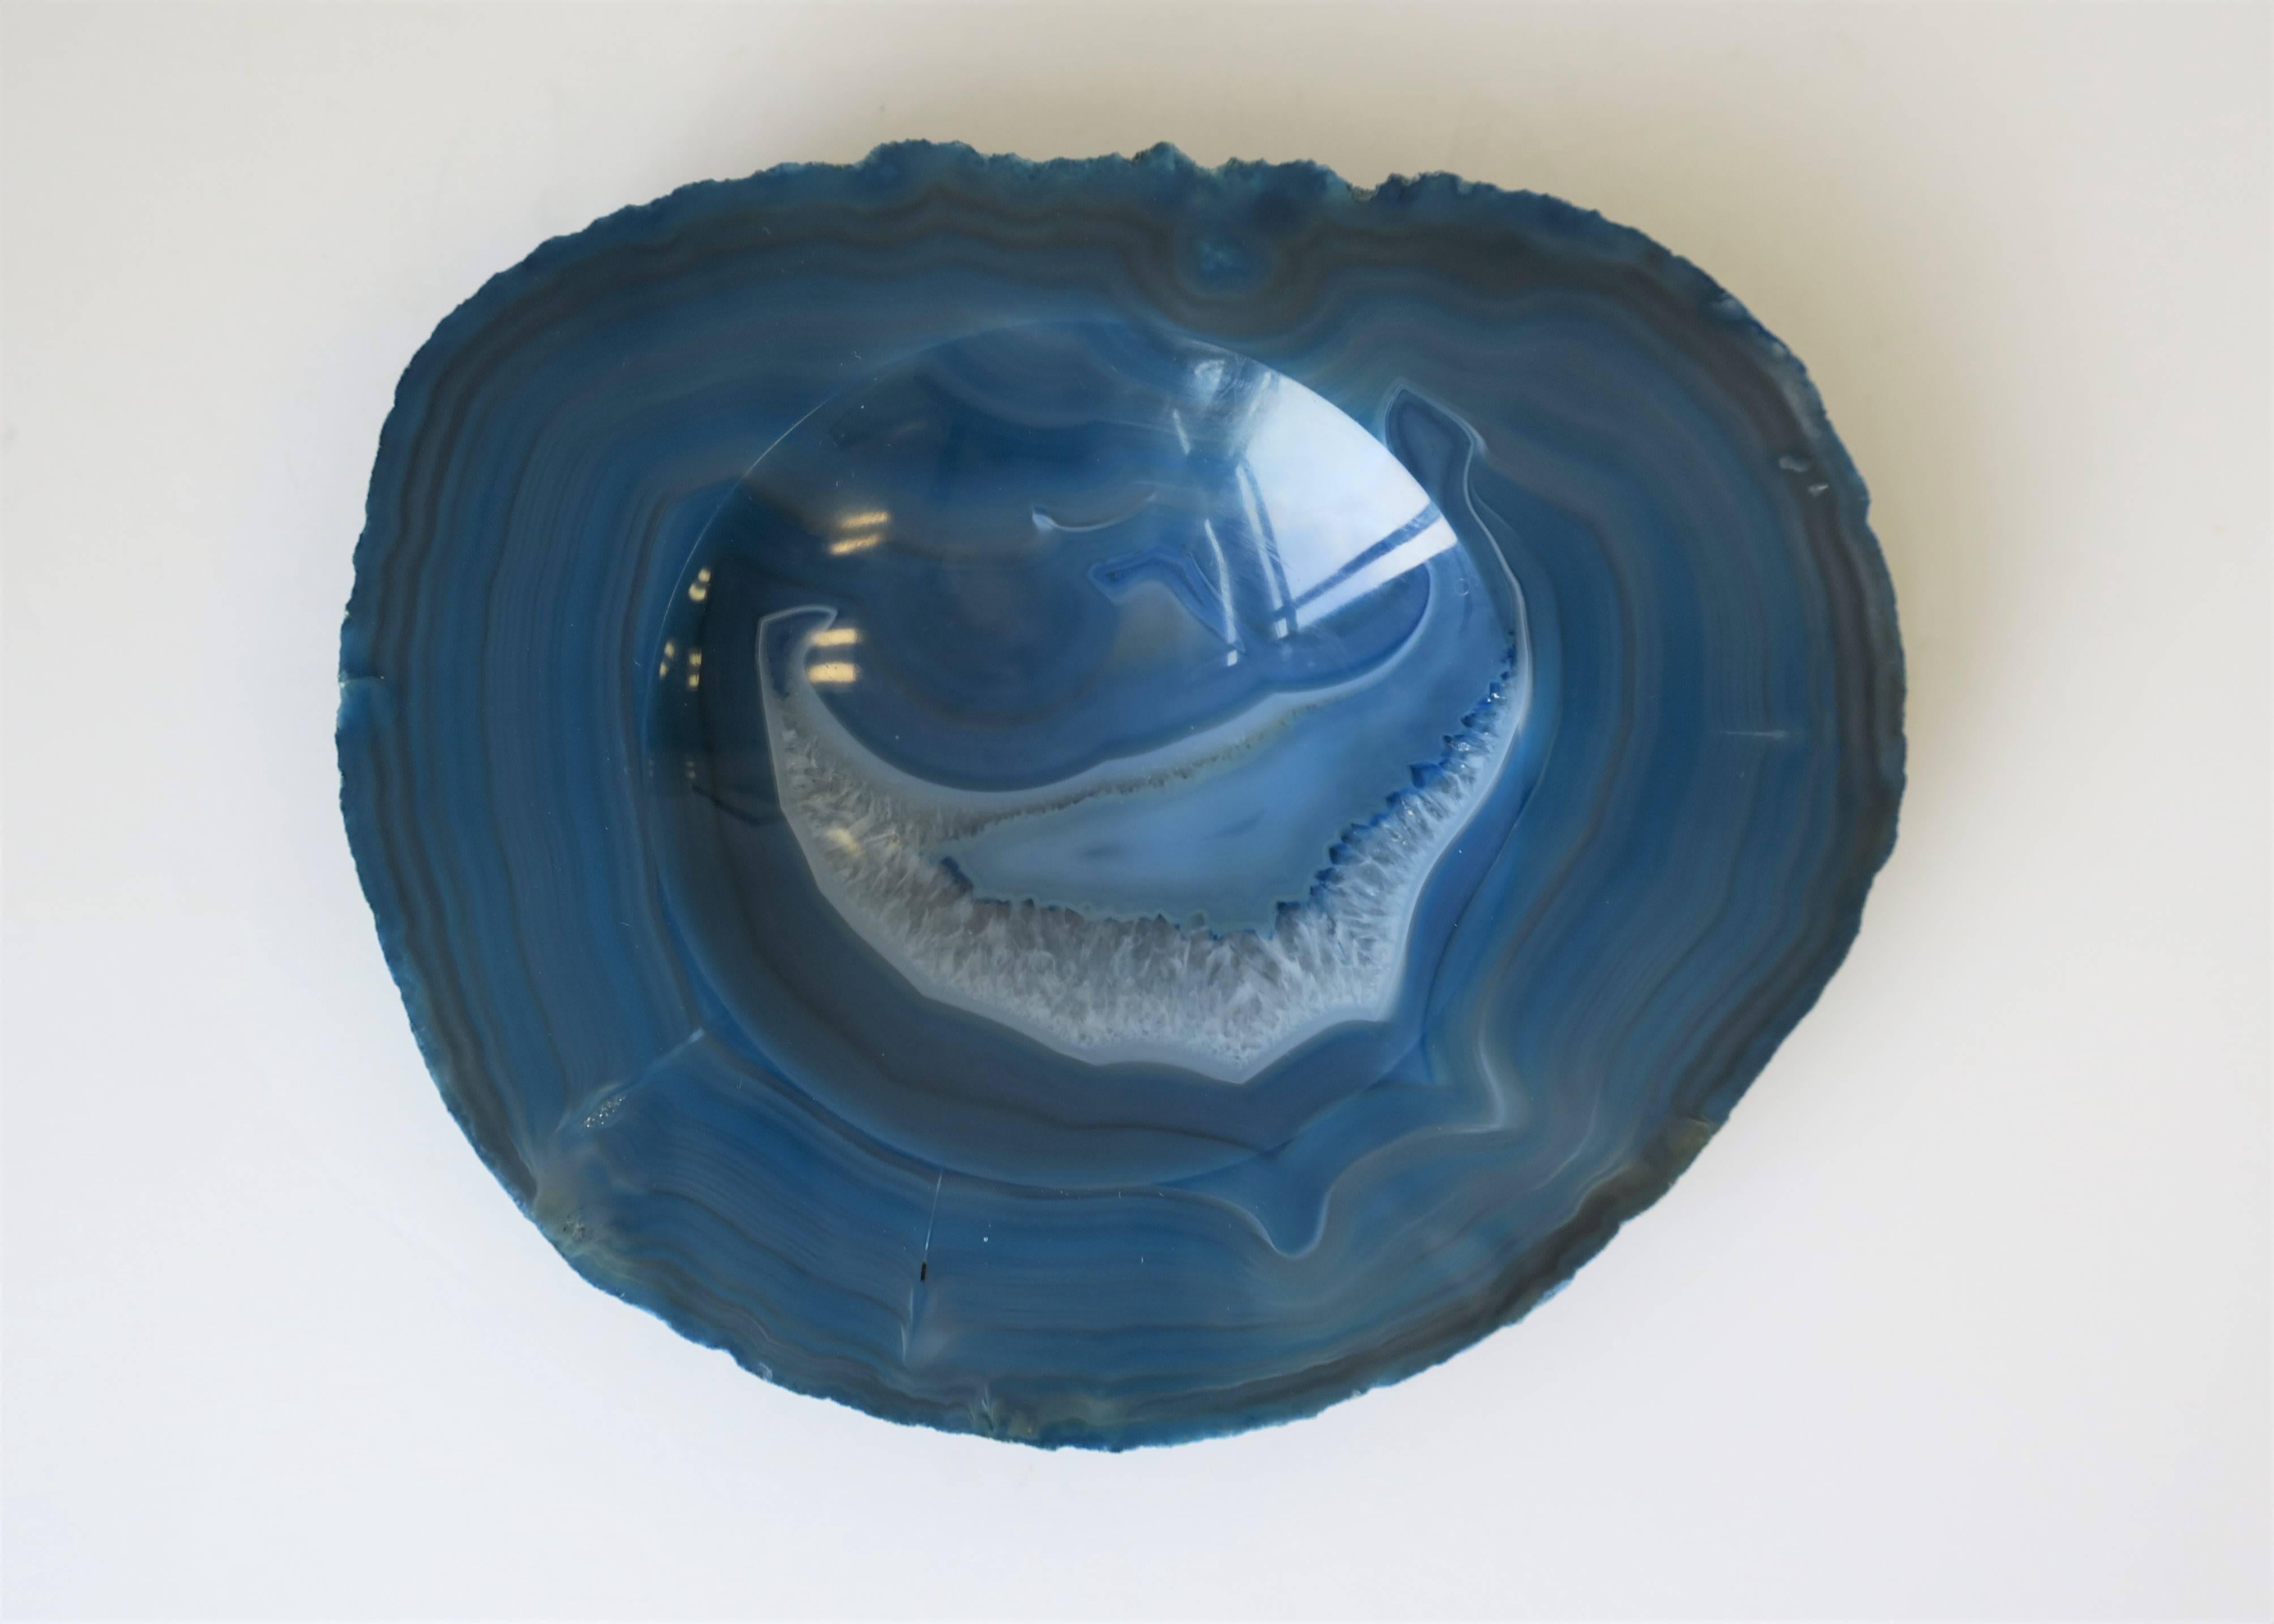 Organic Modern Blue and White Agate Onyx Jewelry Dish or Decorative Object